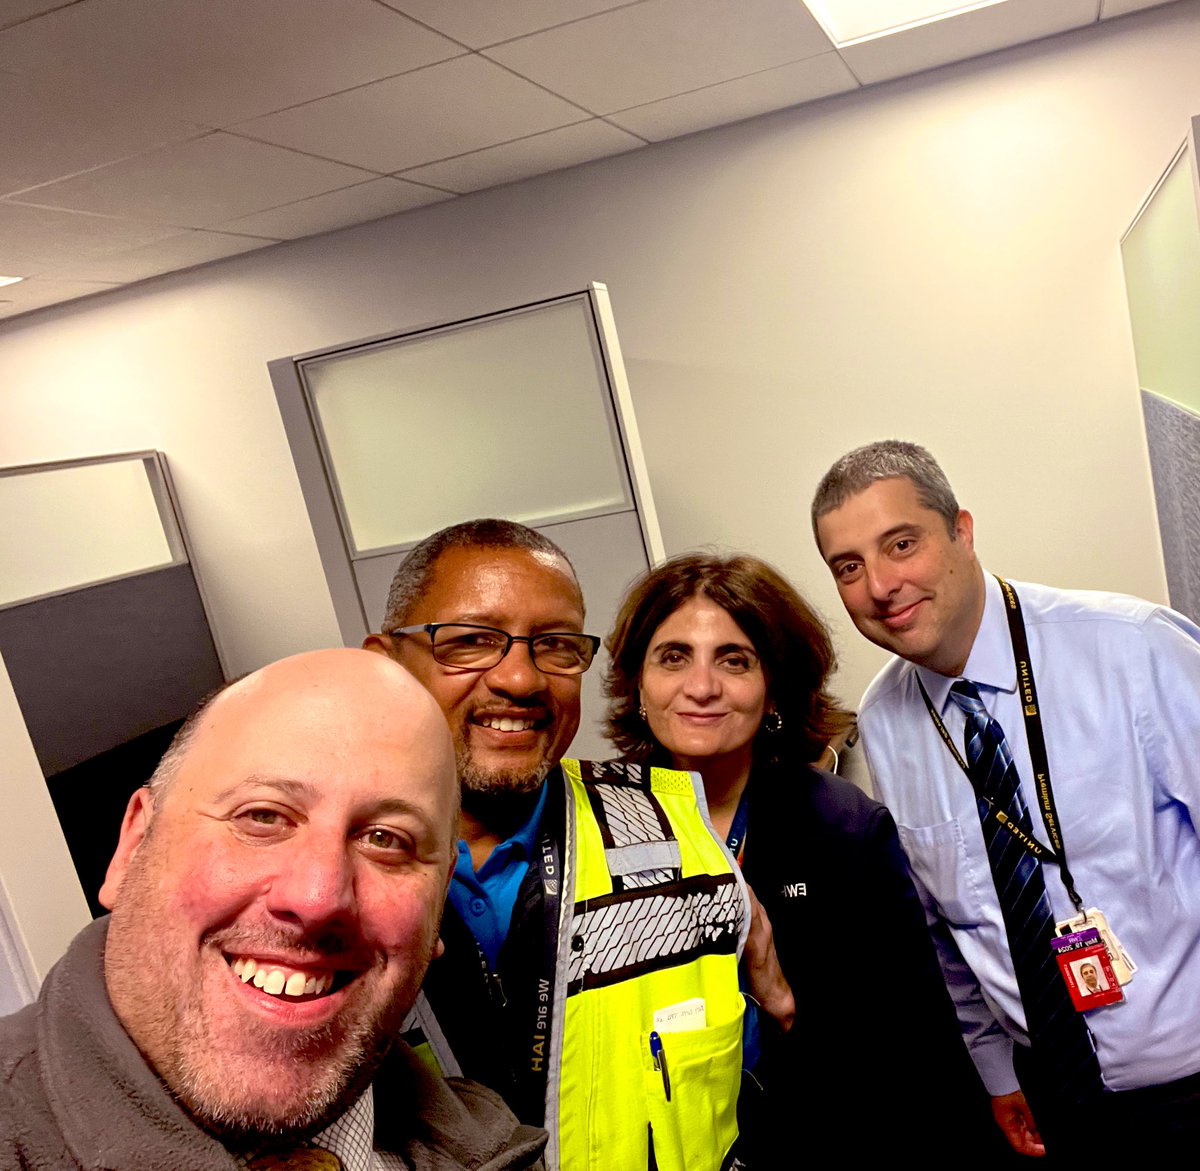 EWR 🗽remarkable on-time performance since 2012 is a testament to the power of teamwork, proving that when we come together with a shared purpose, we can achieve extraordinary results. 💙🙌 @csarkari @Jordan_Bykowsky @JZabransky @SebasKunkowski #NTA @united @MikeHannaUAL